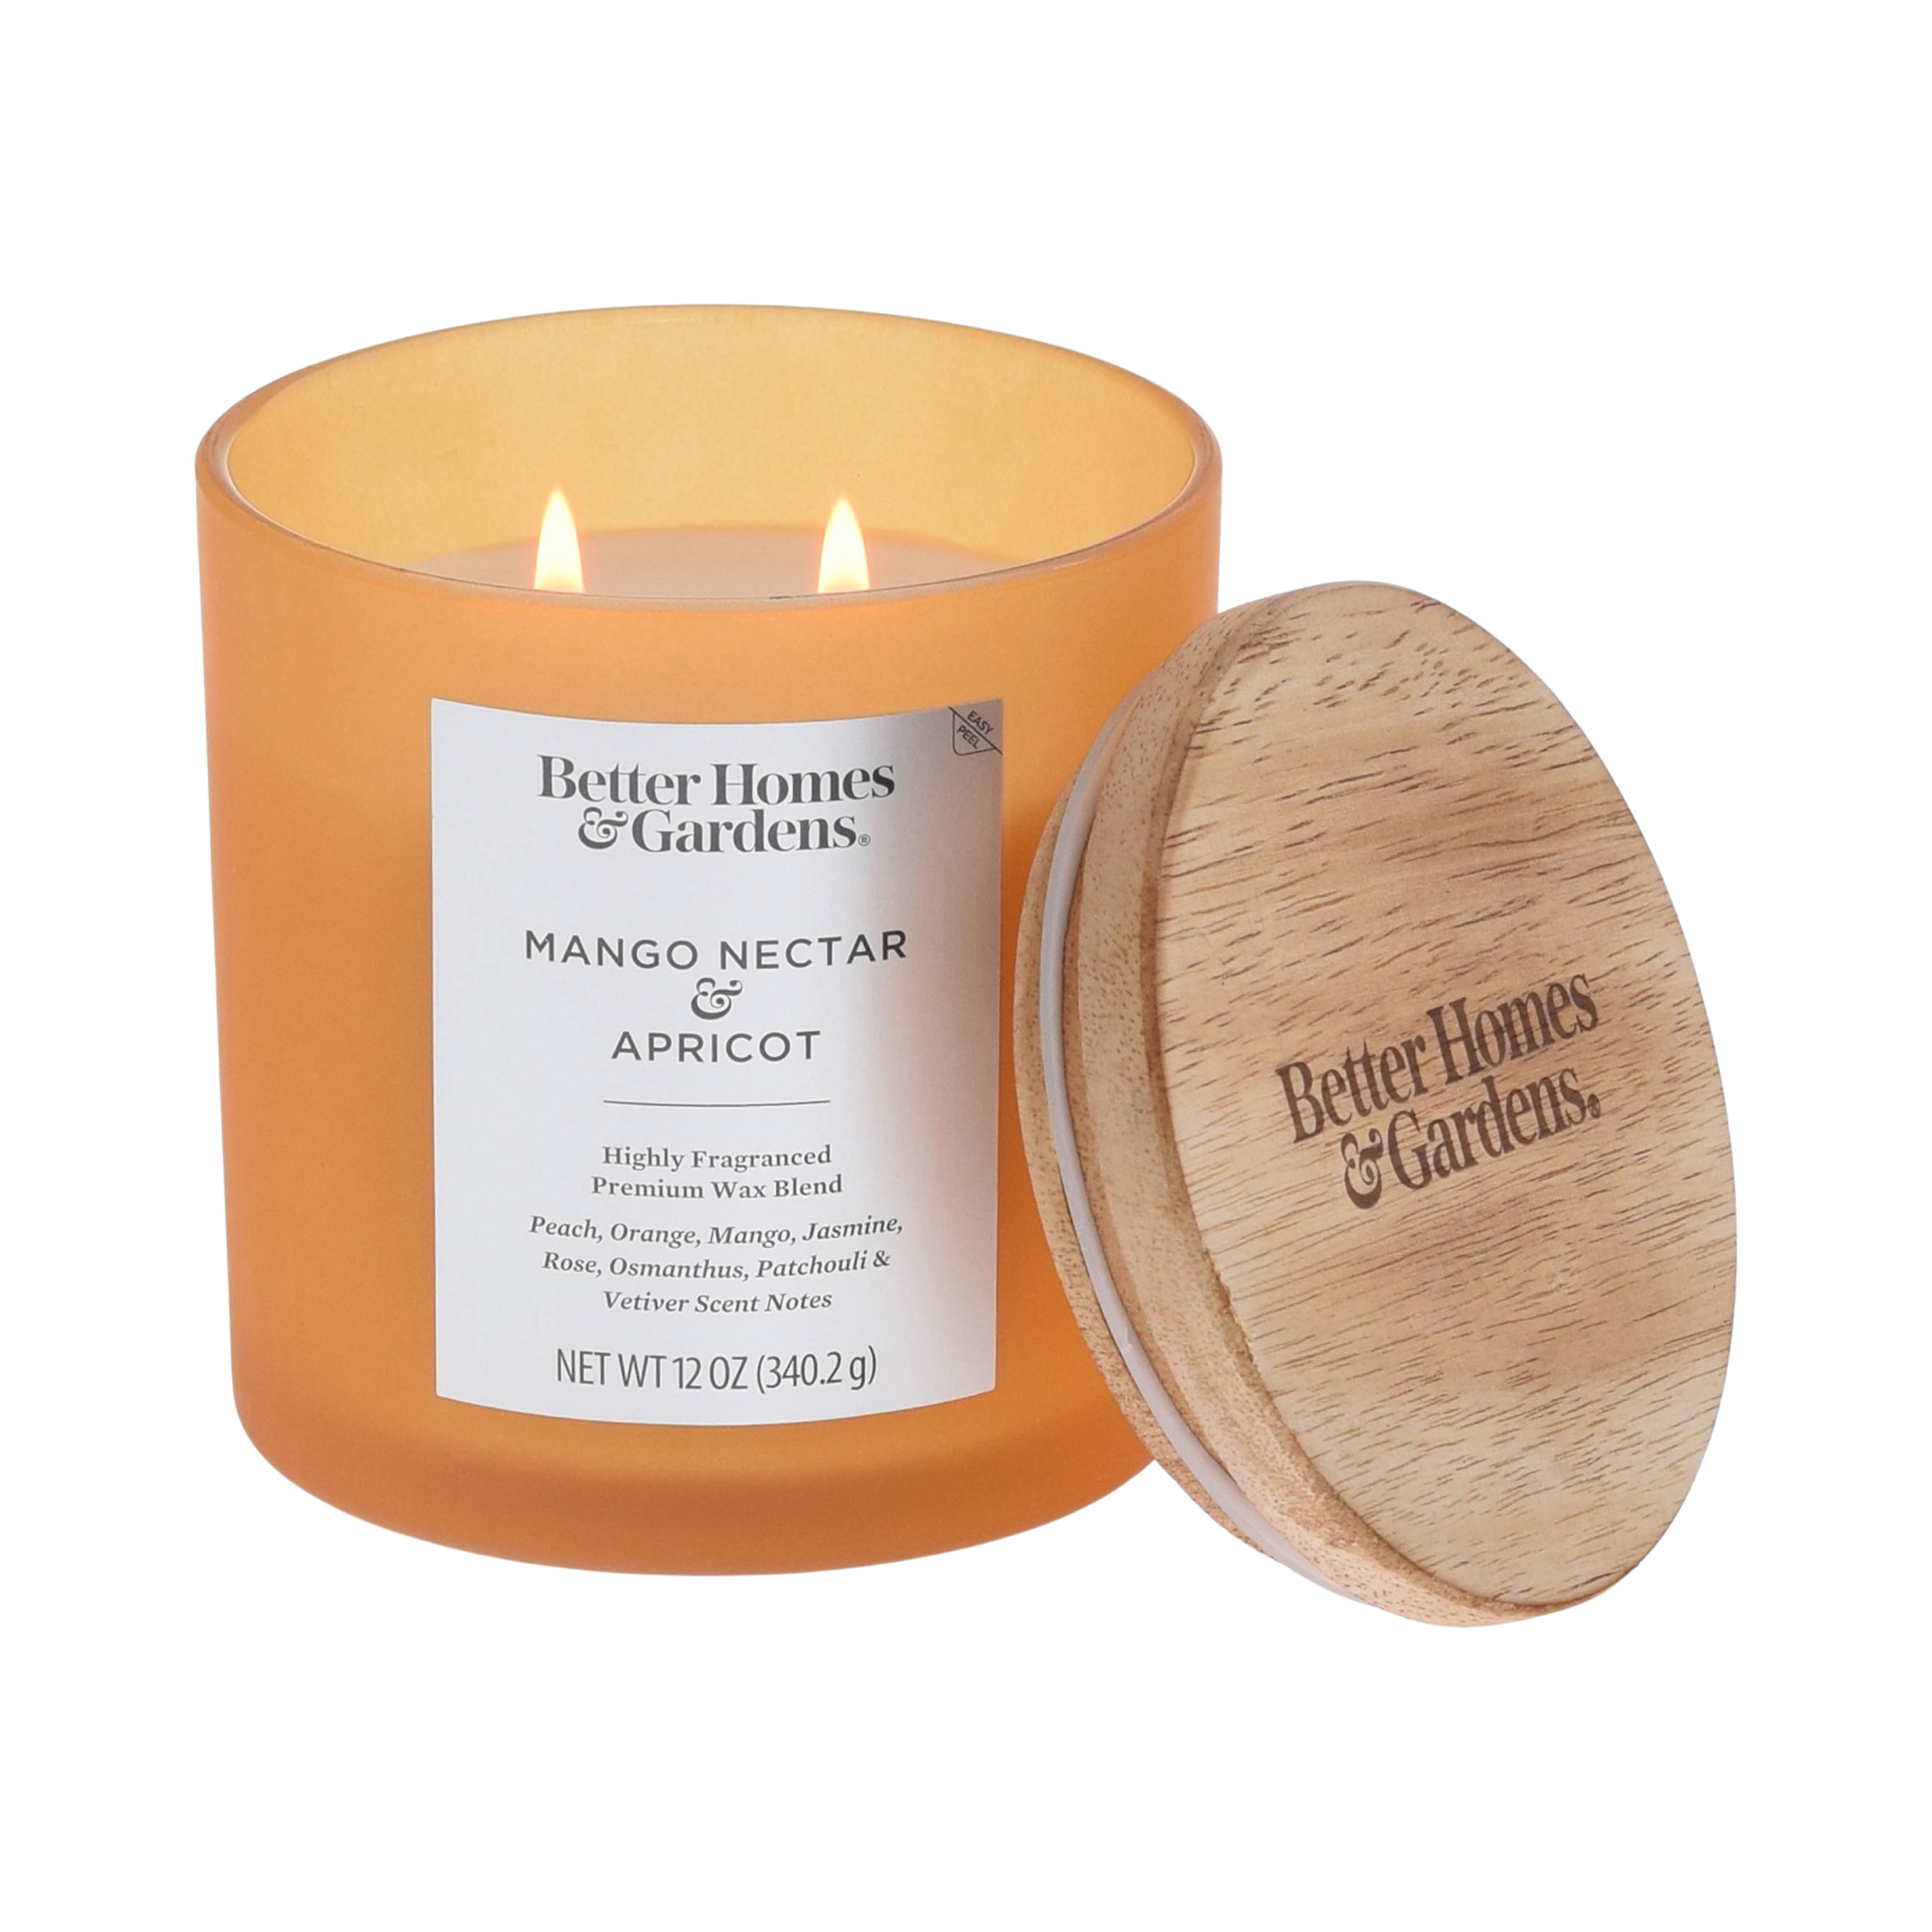 Better Homes & Gardens 12oz Mango Nectar & Apricot Scented 2-Wick Frosted Jar Candle - image 3 of 5